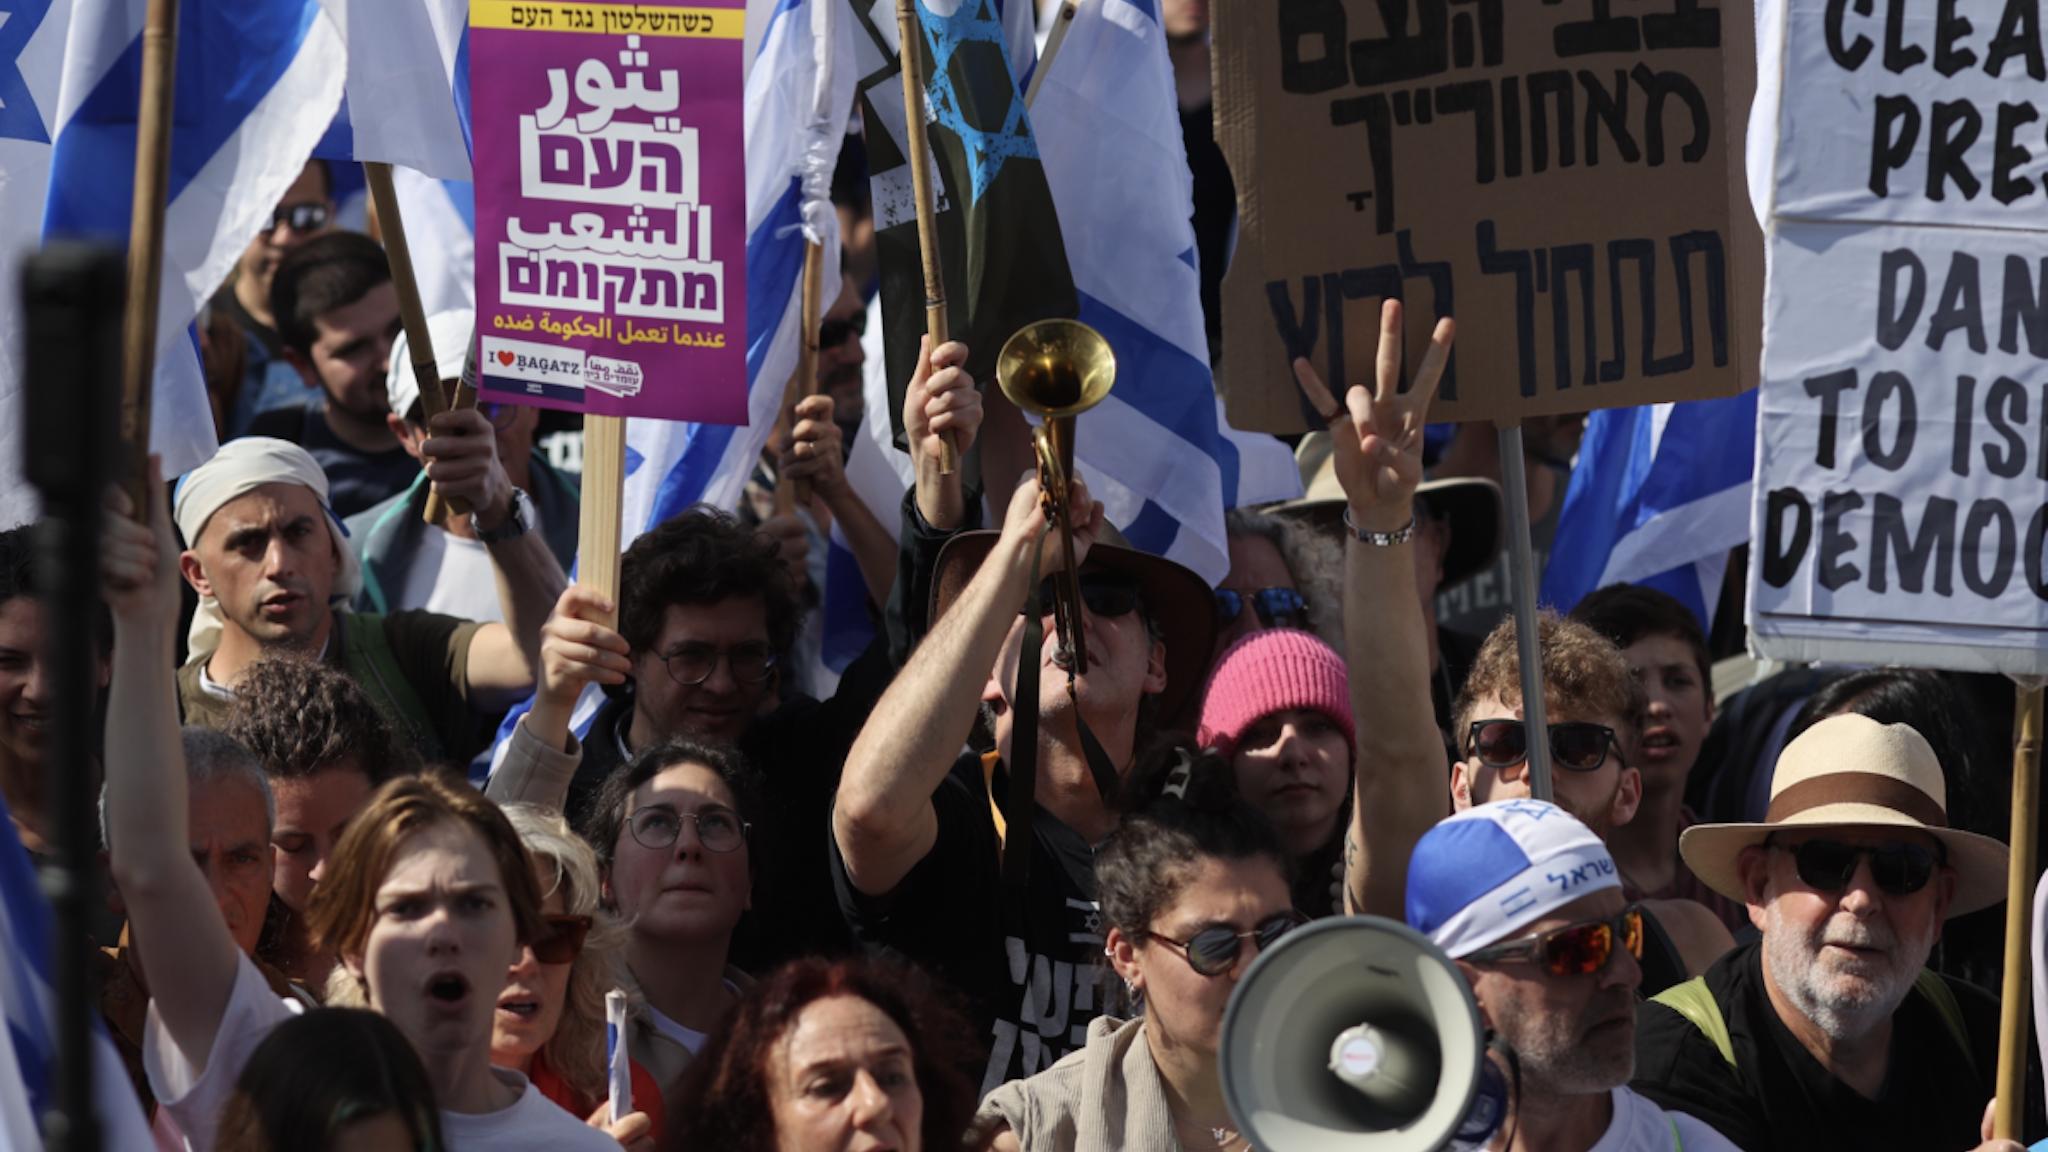 Massive protests erupted on Israel’s streets after Prime Minister Benjamin Netanyahu sacked a key cabinet member who spoke out against his ongoing effort to reform the Jewish State’s judicial system.